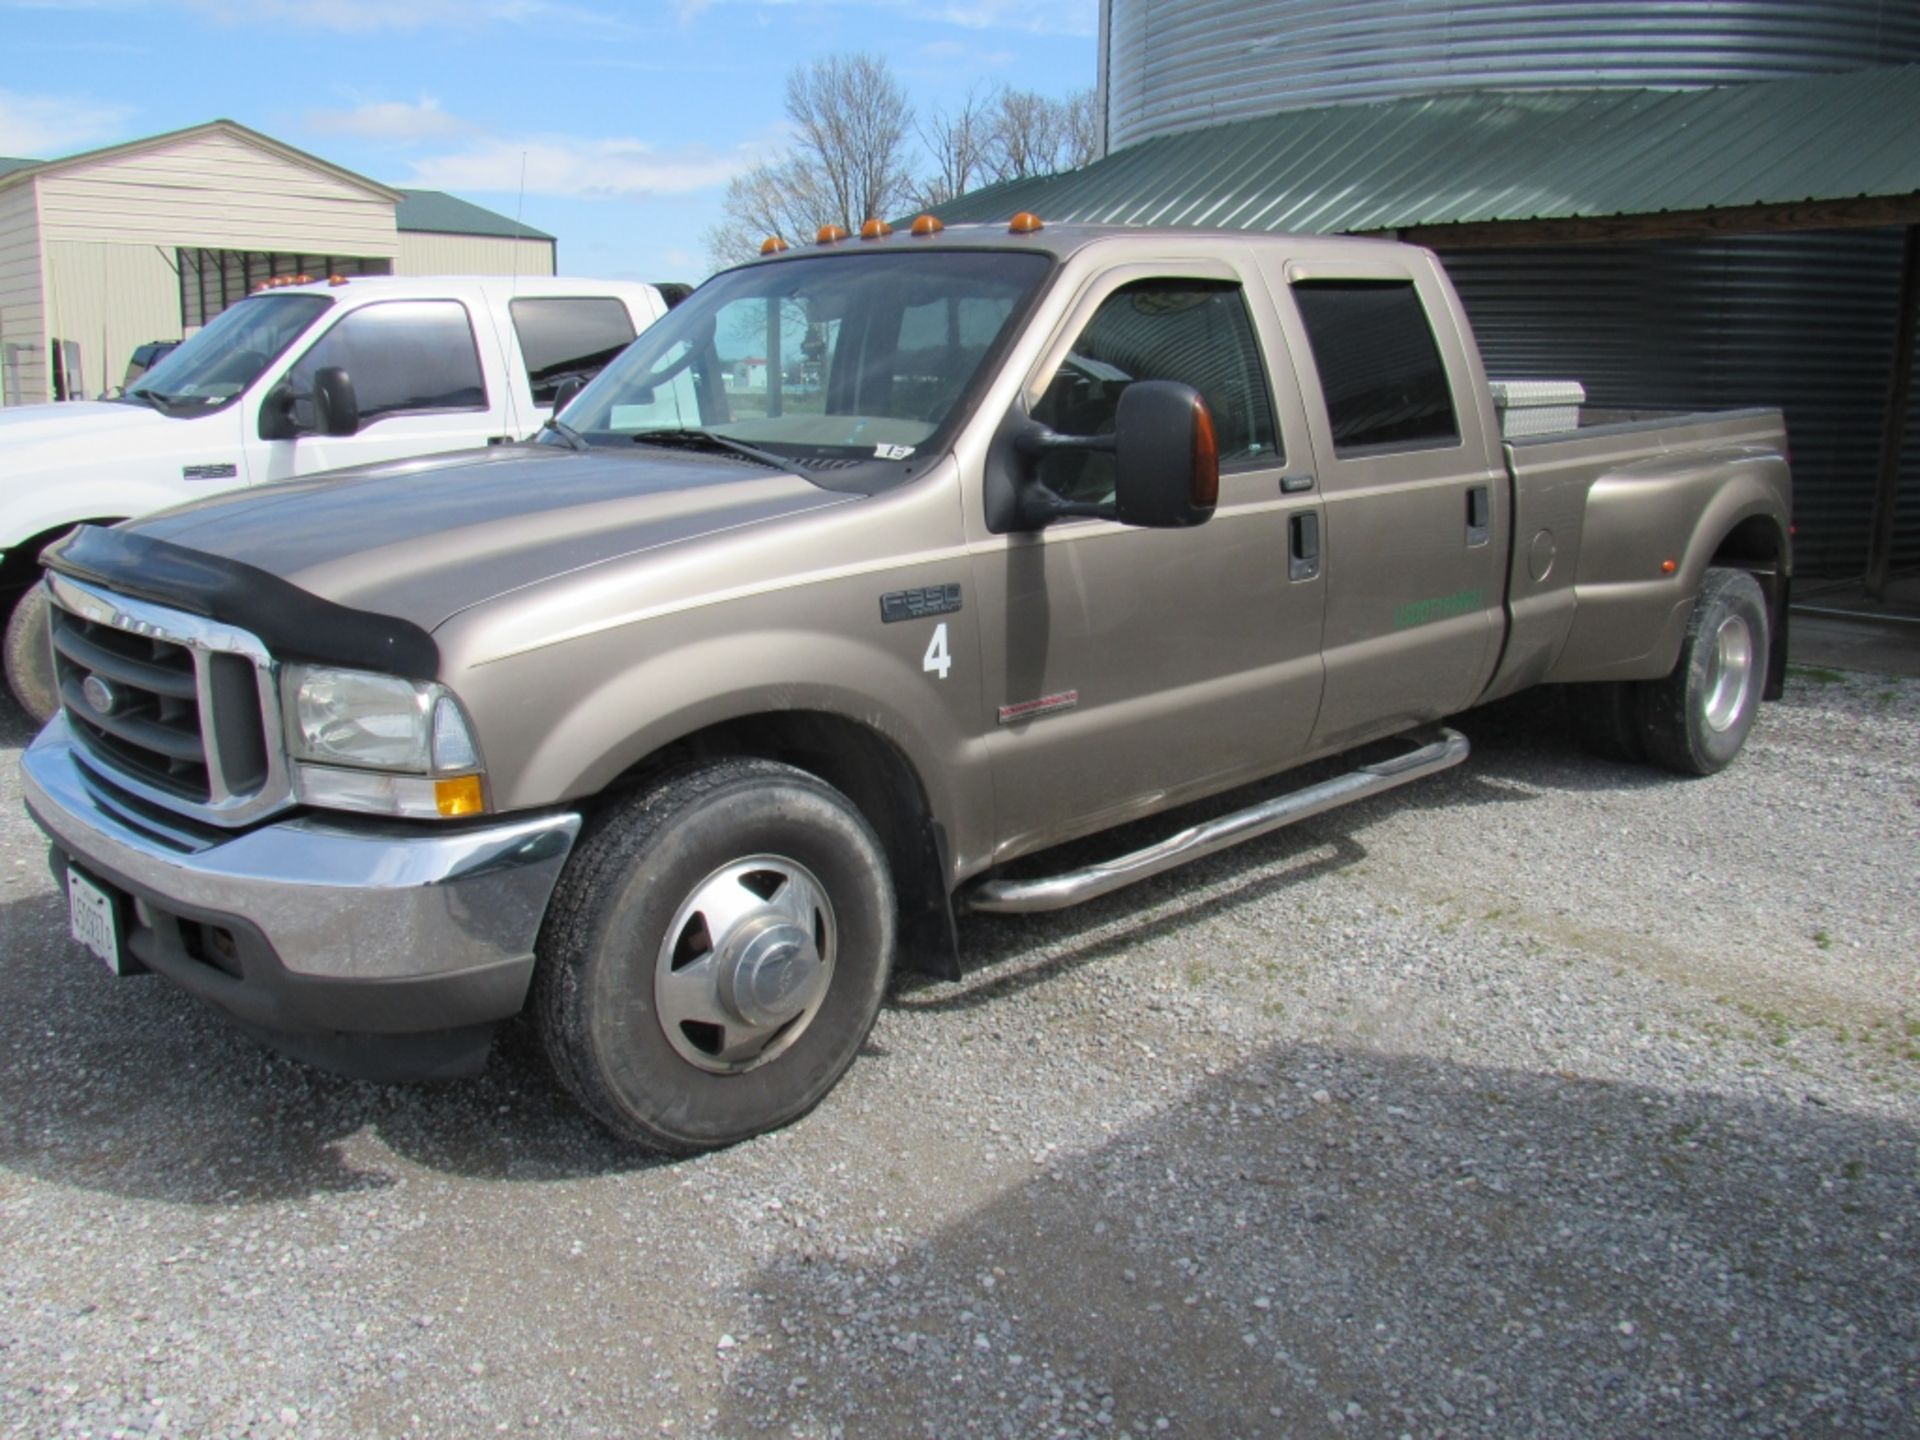 2004 Ford F-350 XLT 2wd 6.0L Powerstroke Diesel Engine - Image 21 of 22